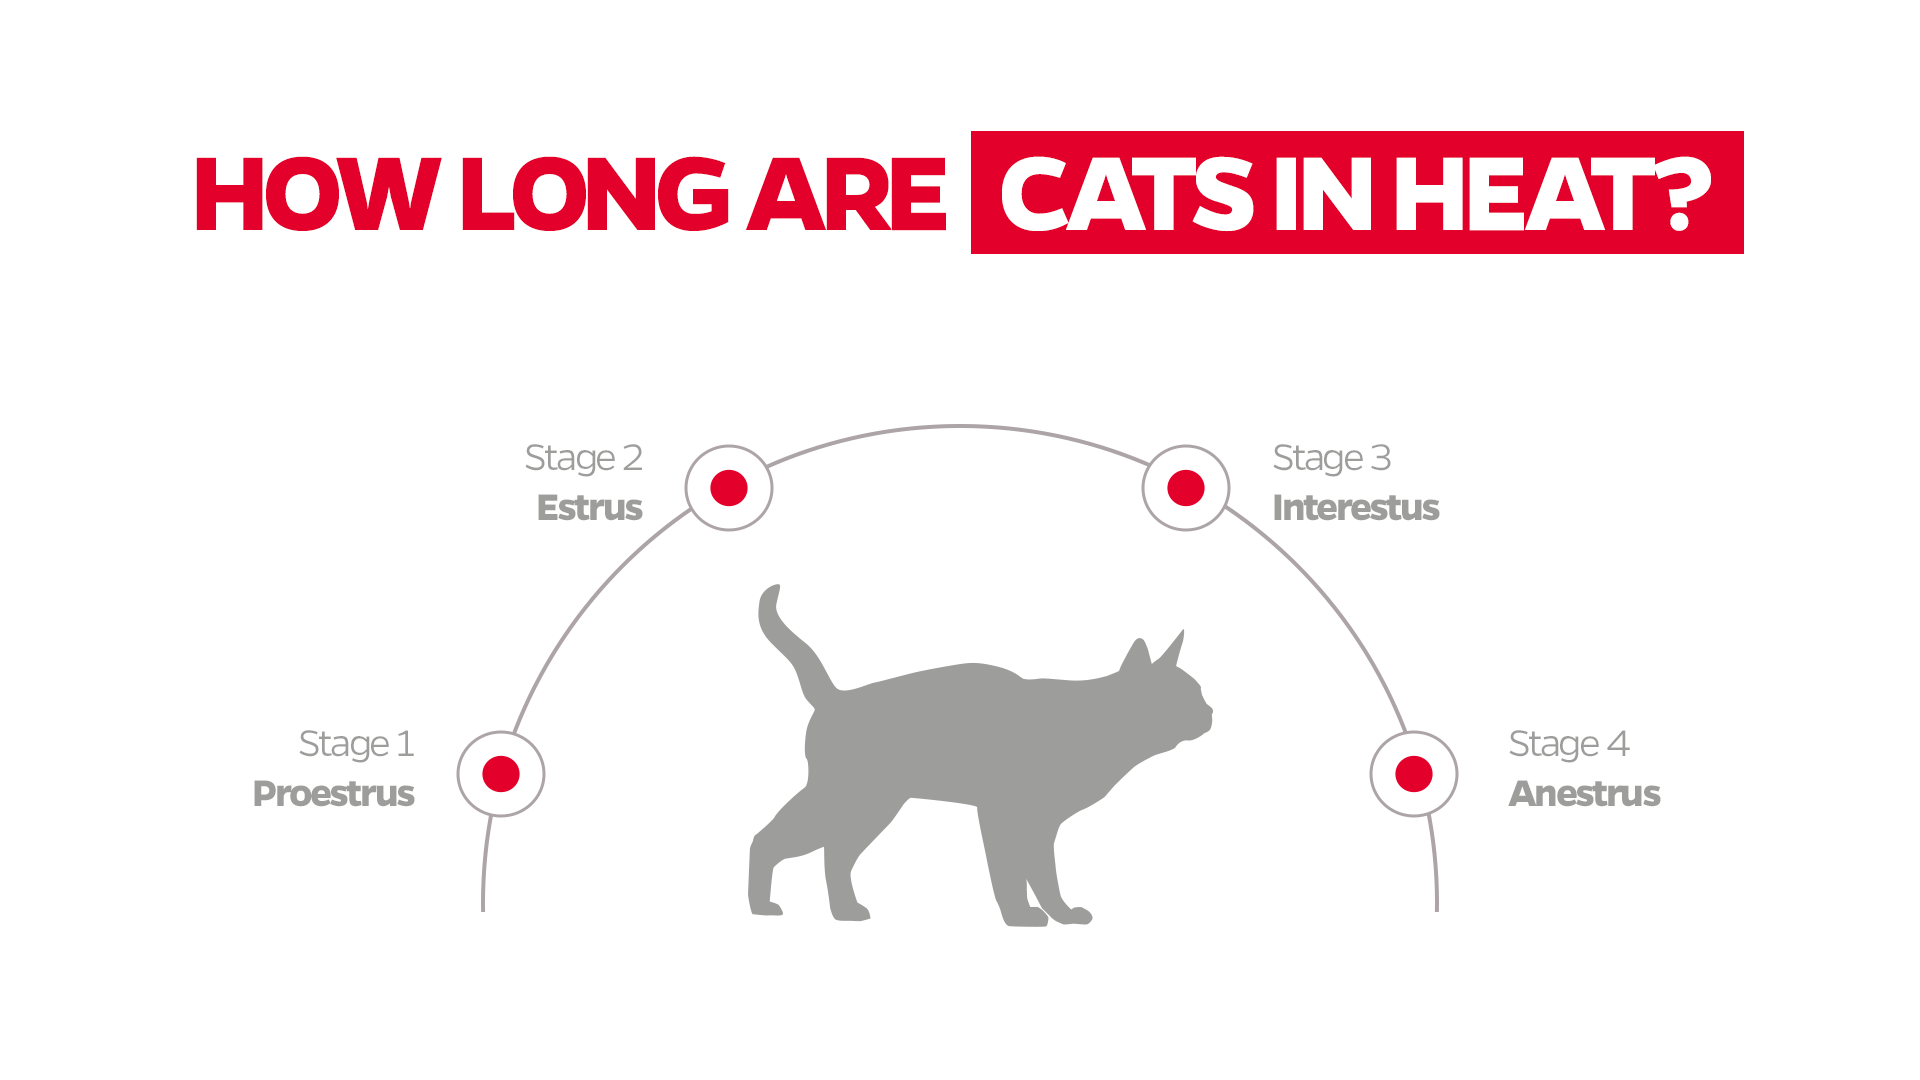 how long are cats in heat?